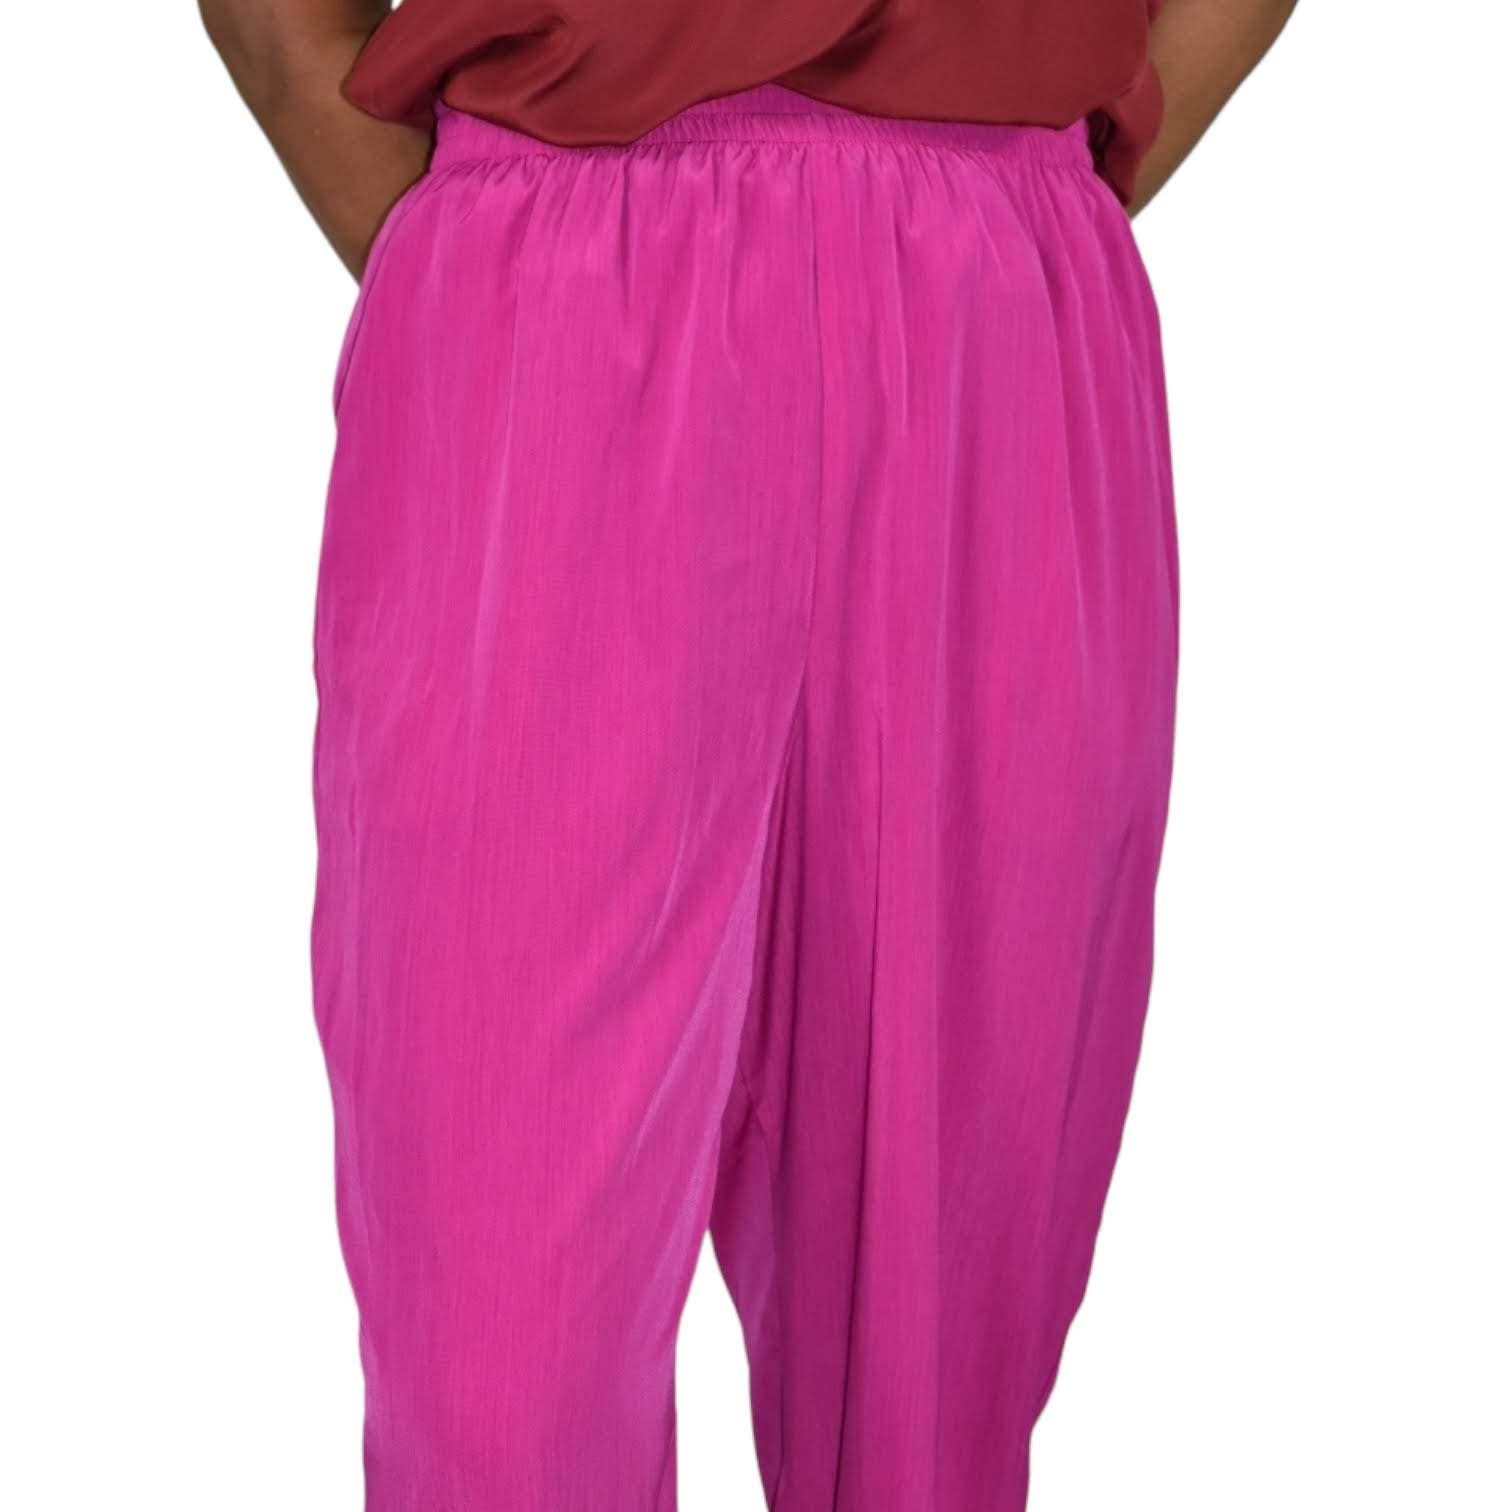 Magenta Pants SG Sport Vintage Pink Purple Casual Elastic Waist Tapered Granny Size Small